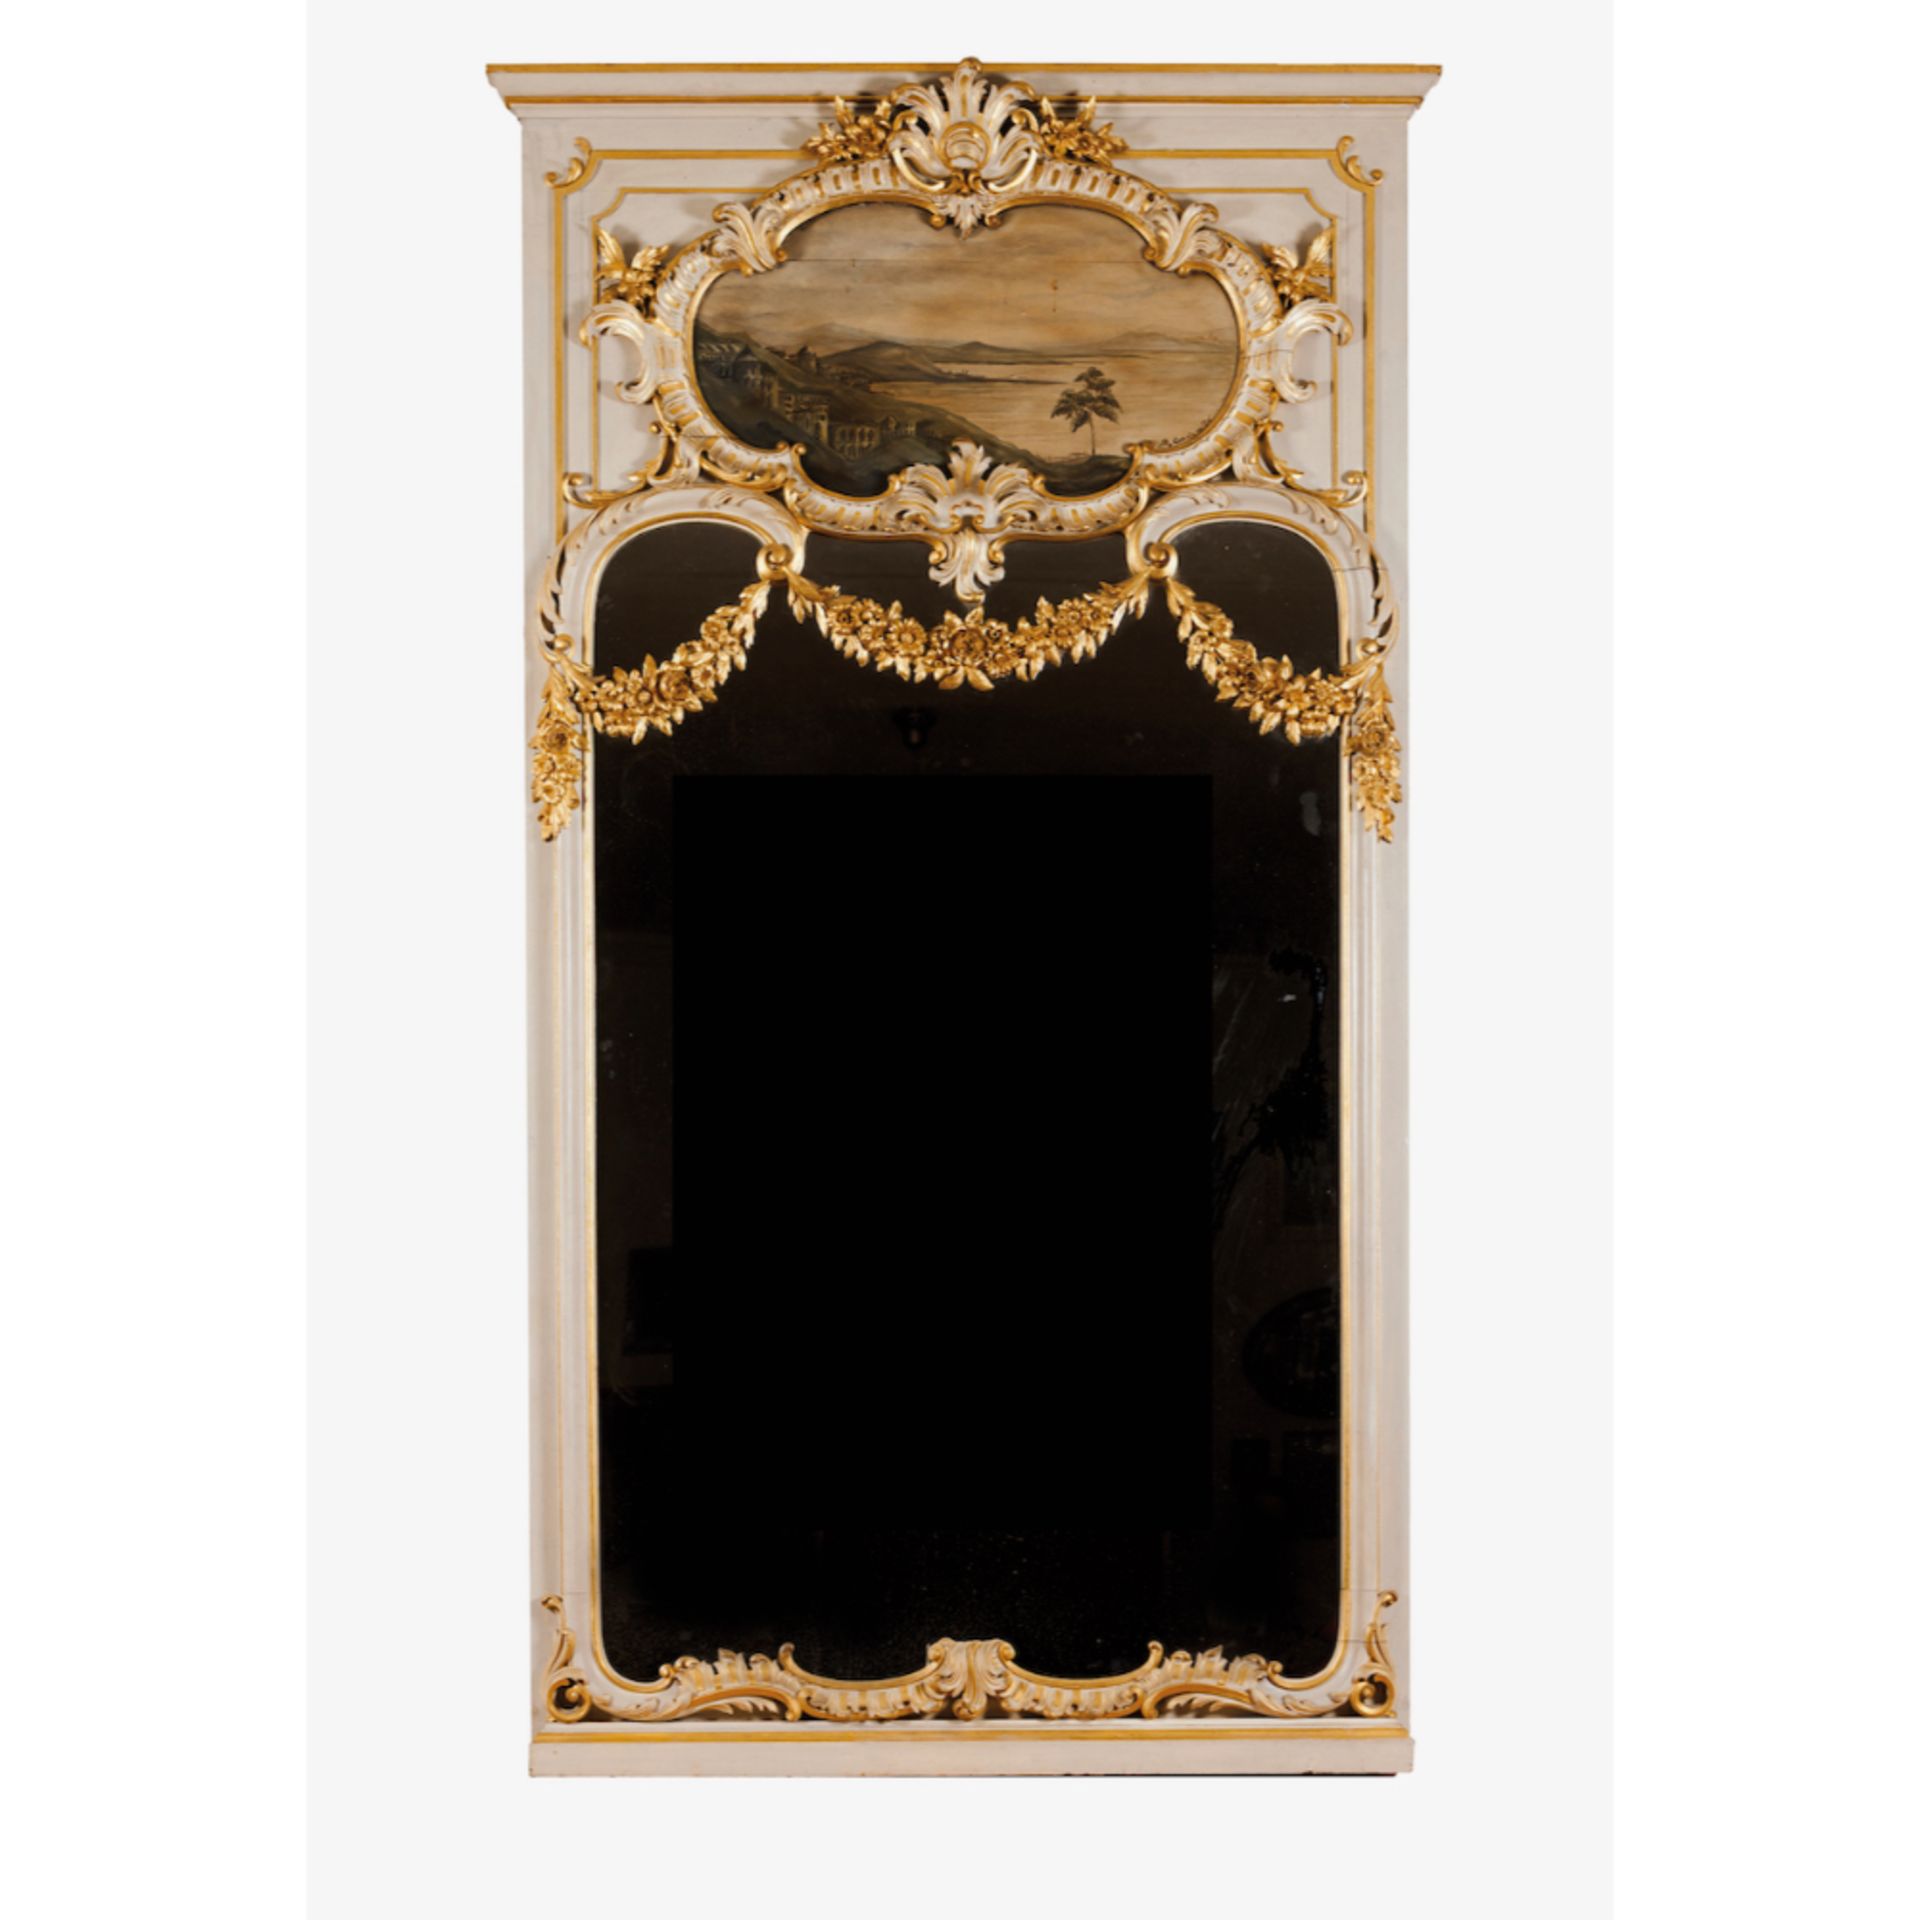 A large mirrorCarved, painted and gilt frame of floral and garlands decoration Painted cartouche